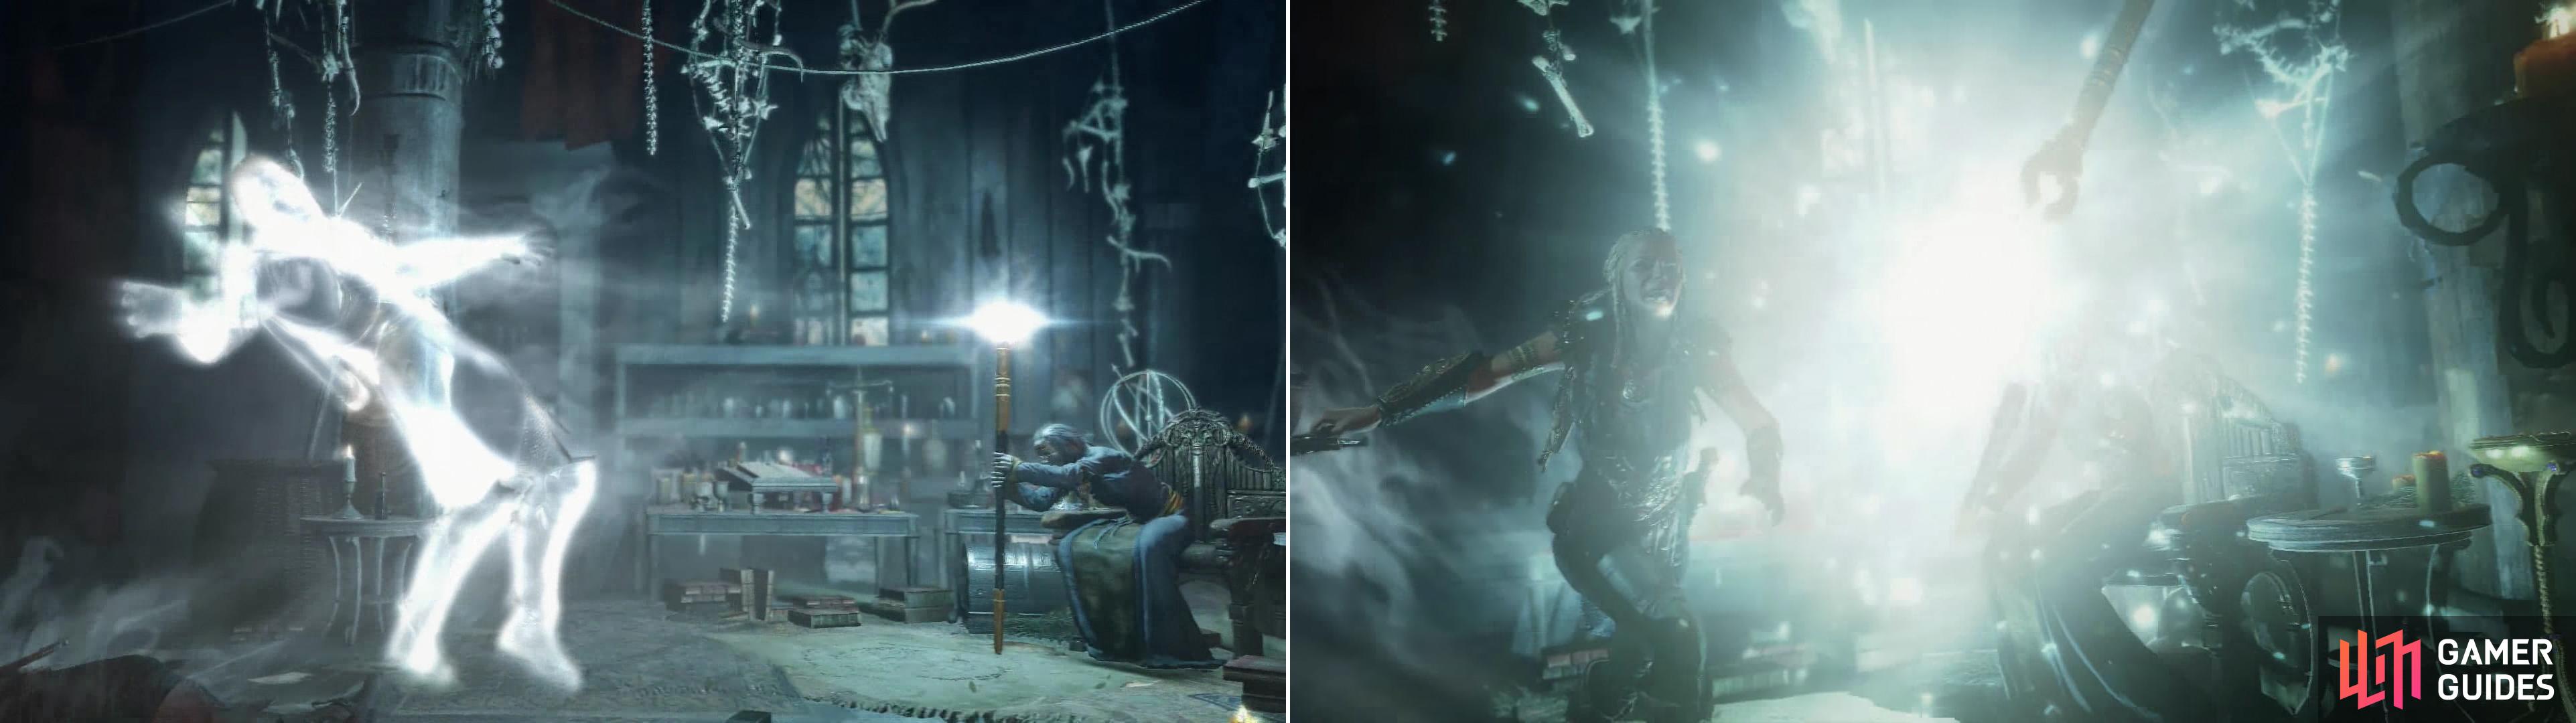 Talion and Celembrimbor will be ambushed when they return to Marwen (left) but Lithariel will intervene in a timely manner (right).